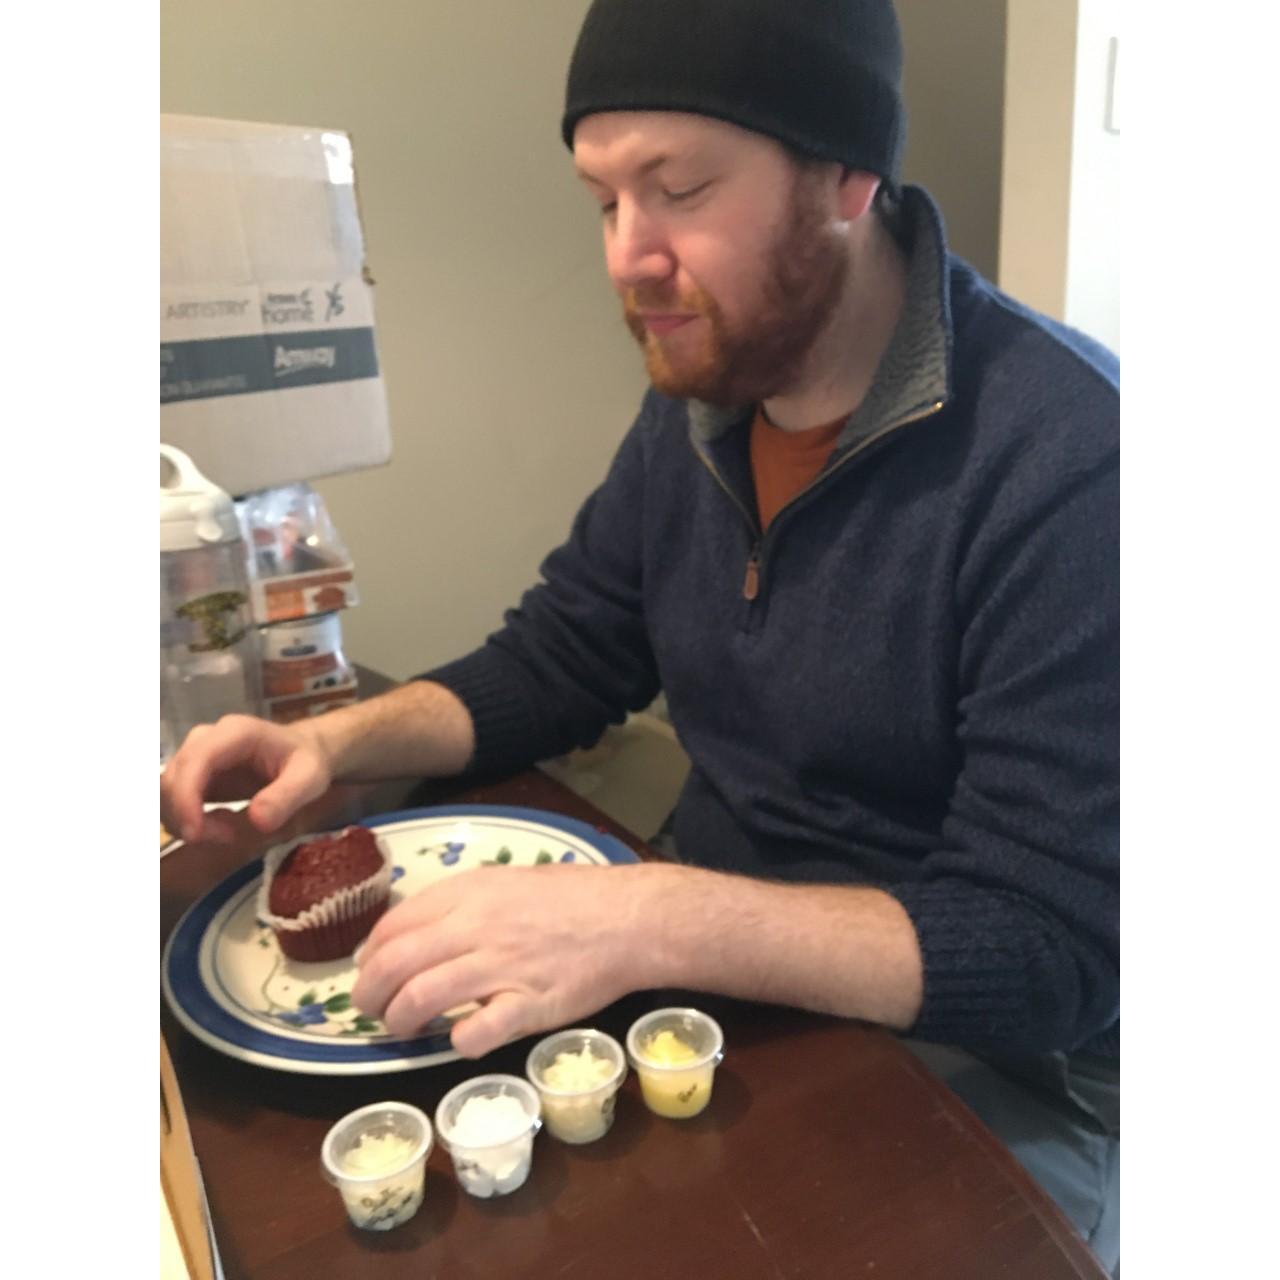 Jackson digging into some amazing cake samples from The Mixing Bowl!